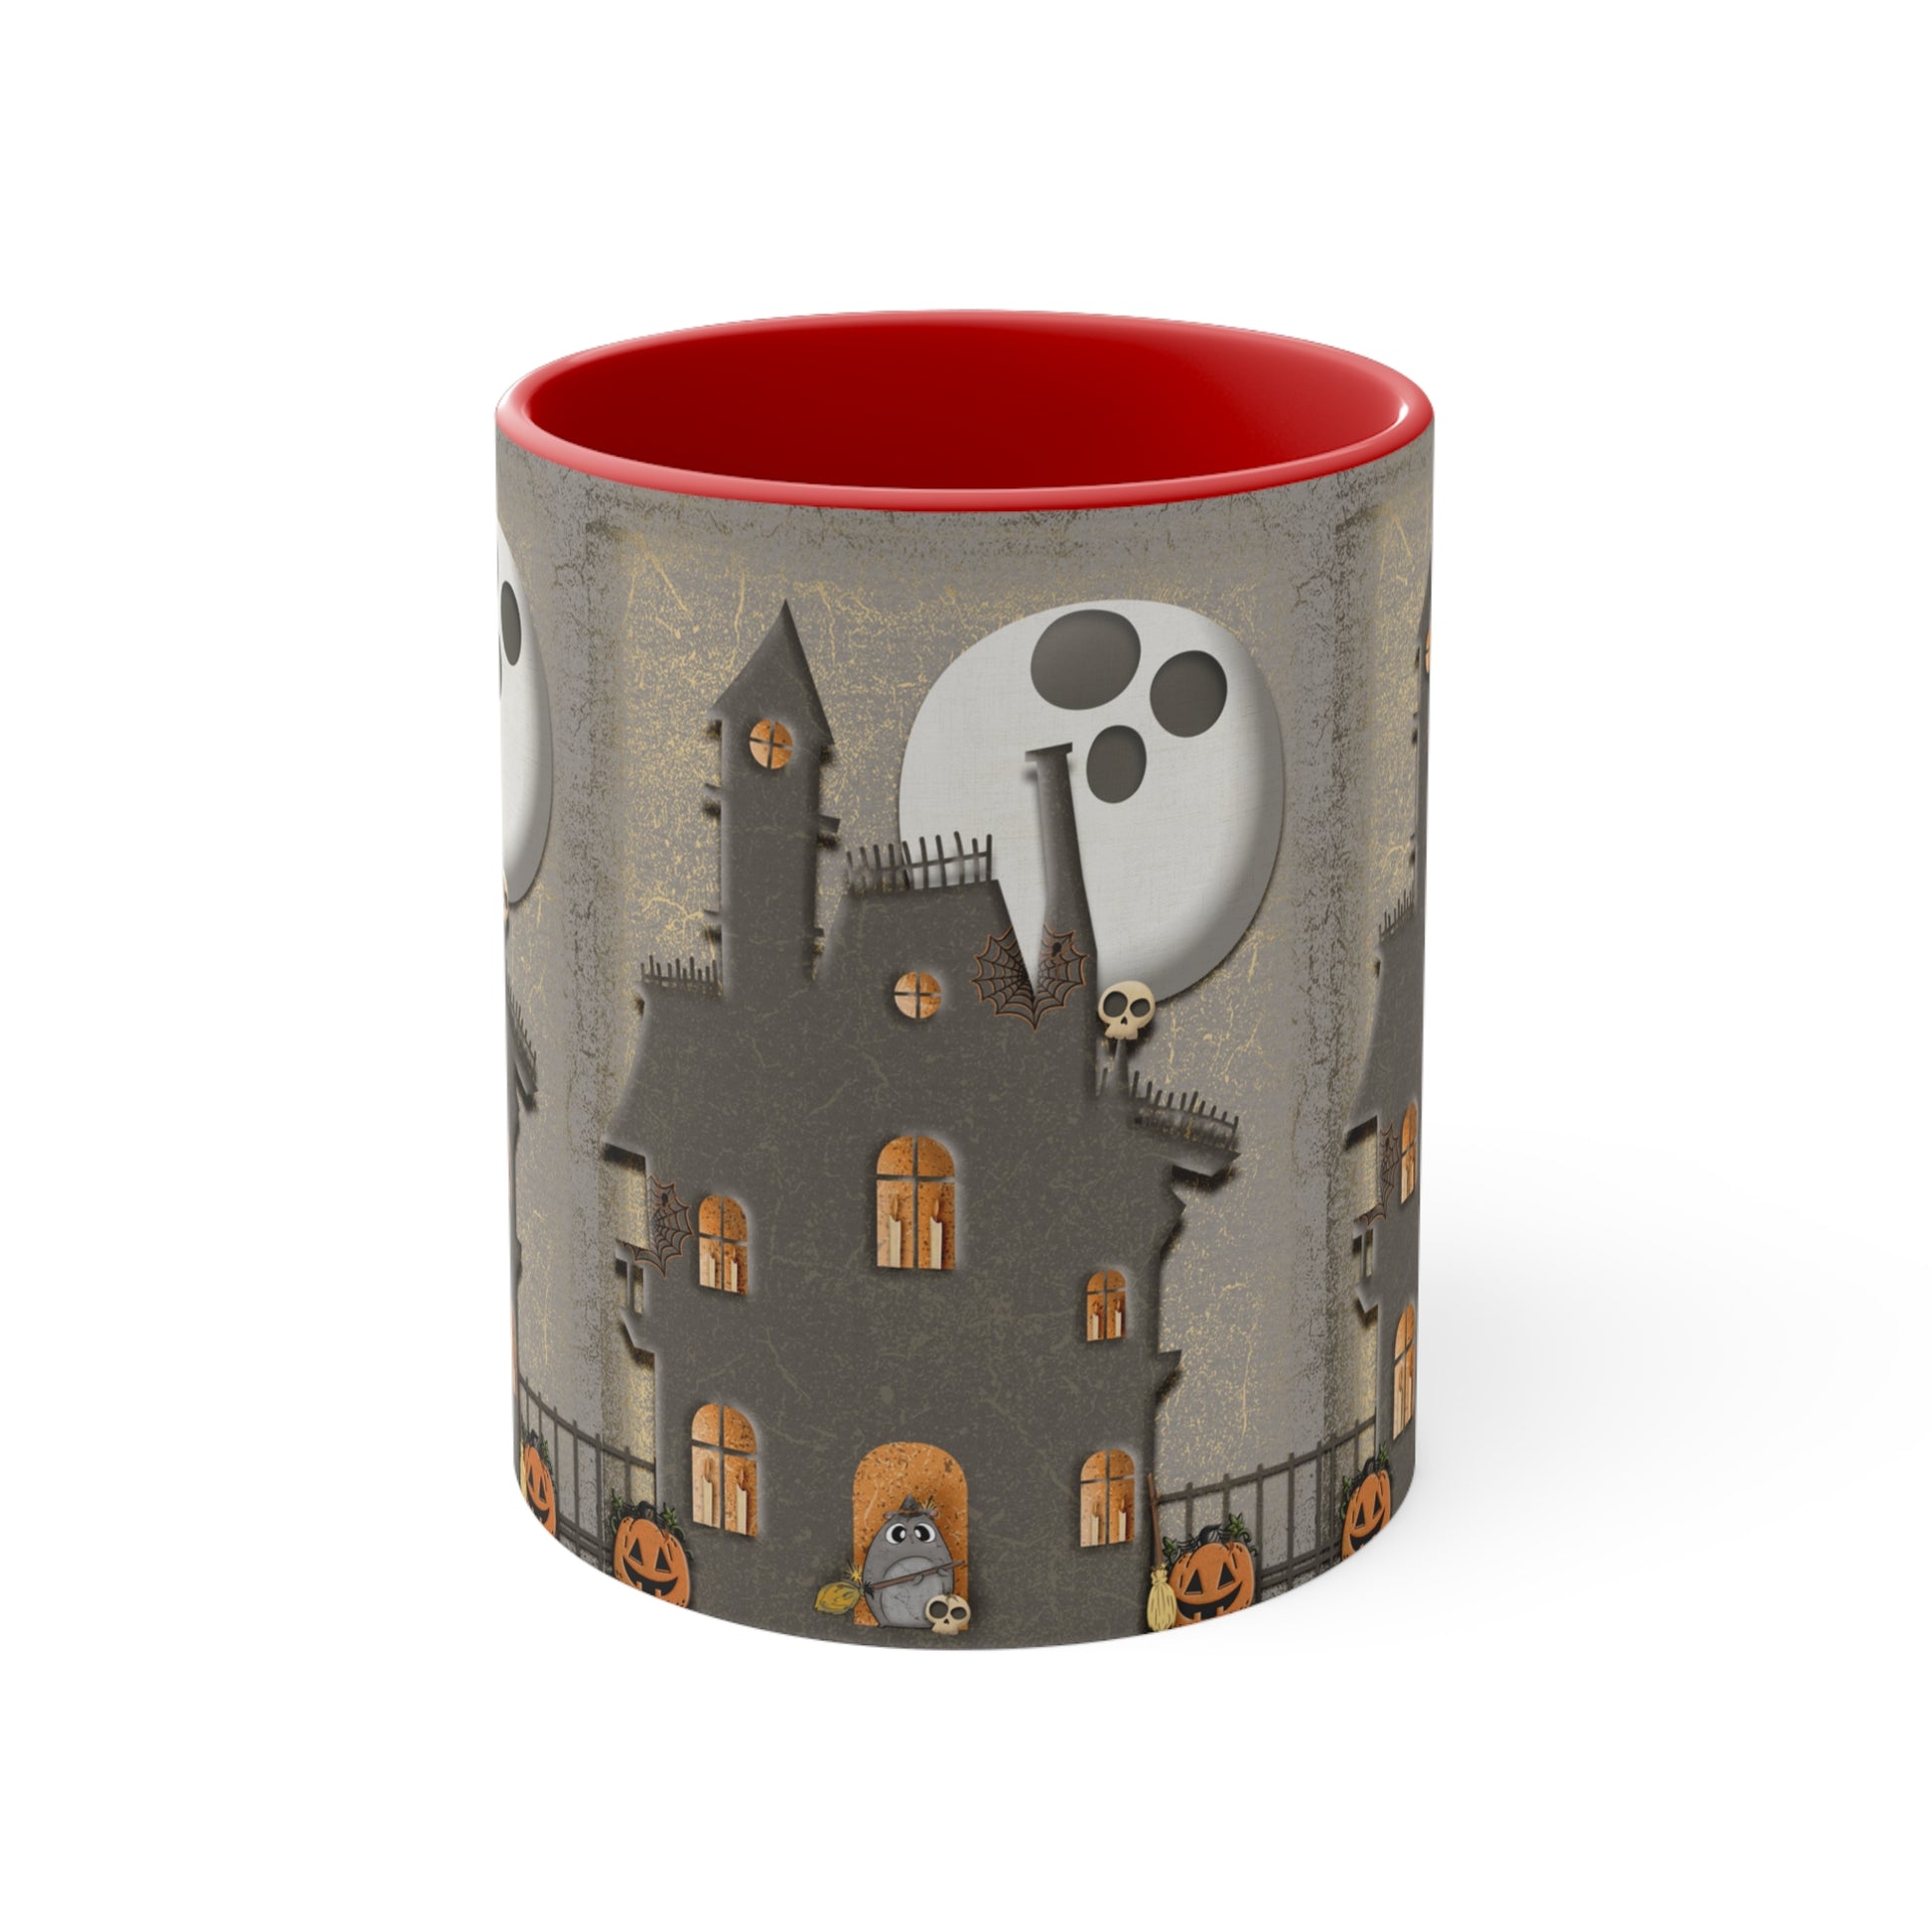 Two Tone Accent Coffee Mug, 11oz - Haunted House red interior